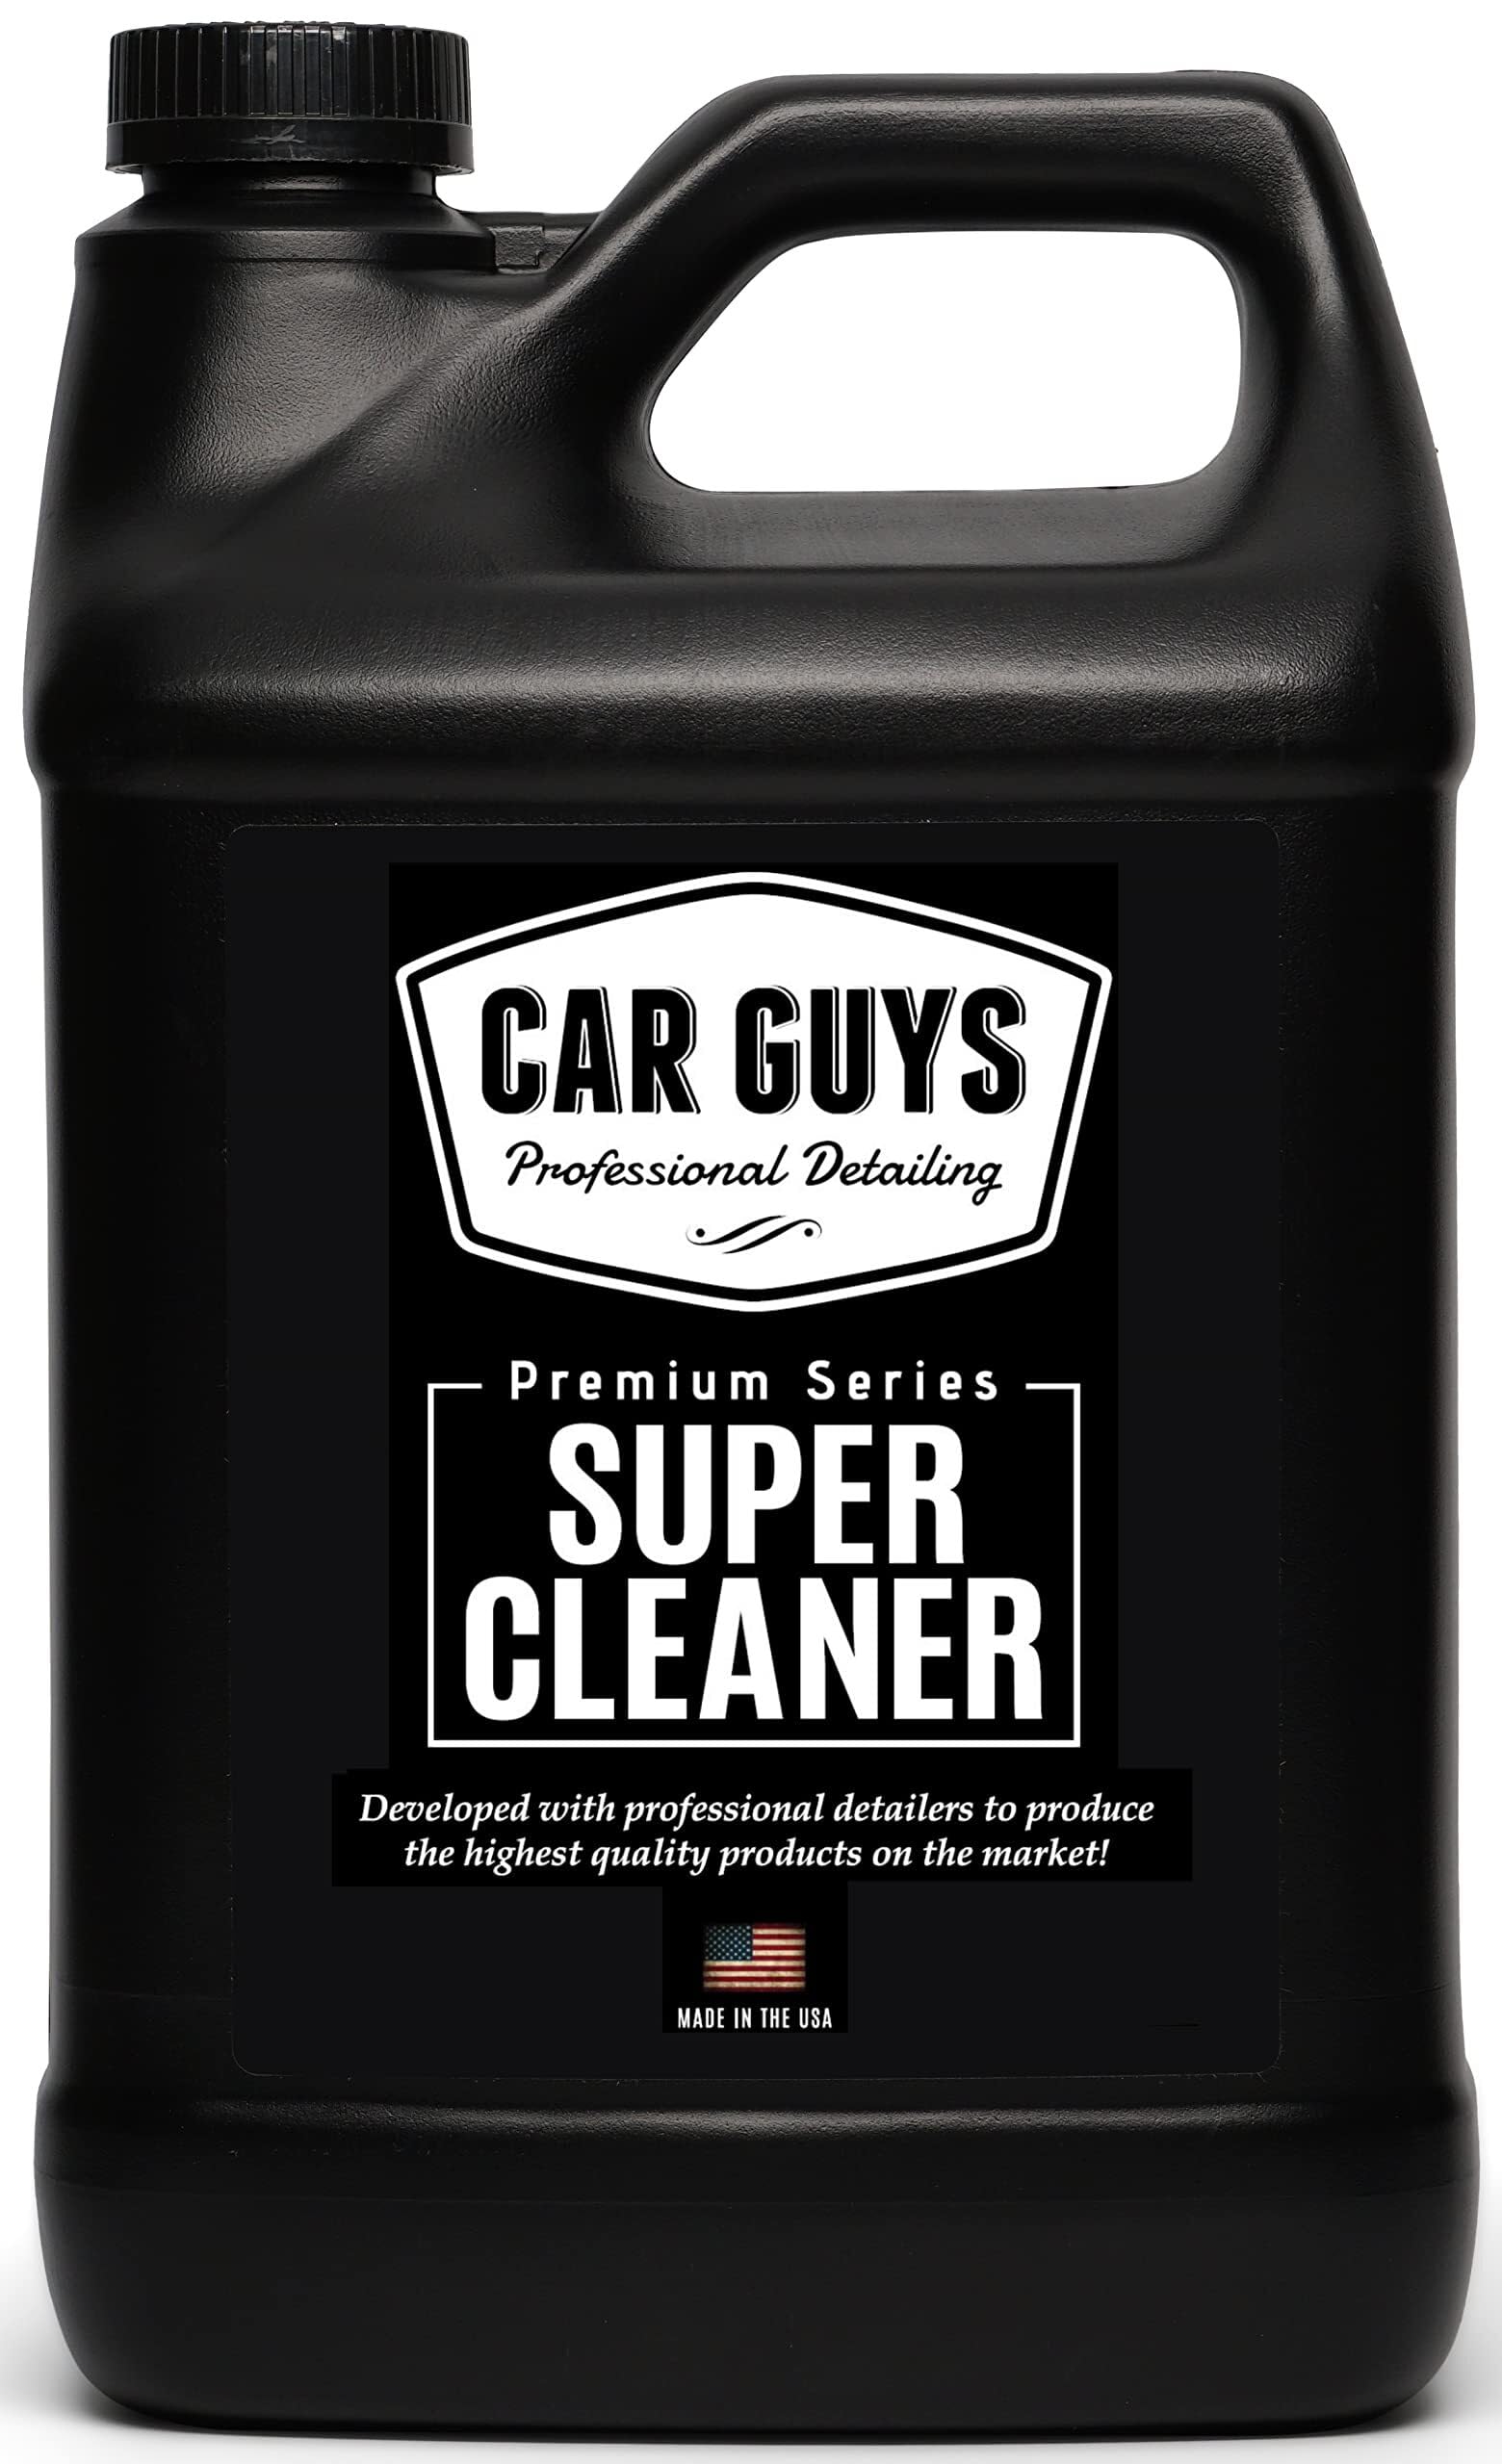 CAR GUYS Super Cleaner 1 Gallon Refill | Effective Car Interior Cleaner | Leather Car Seat Cleaner | Stain Remover for Carpet, U